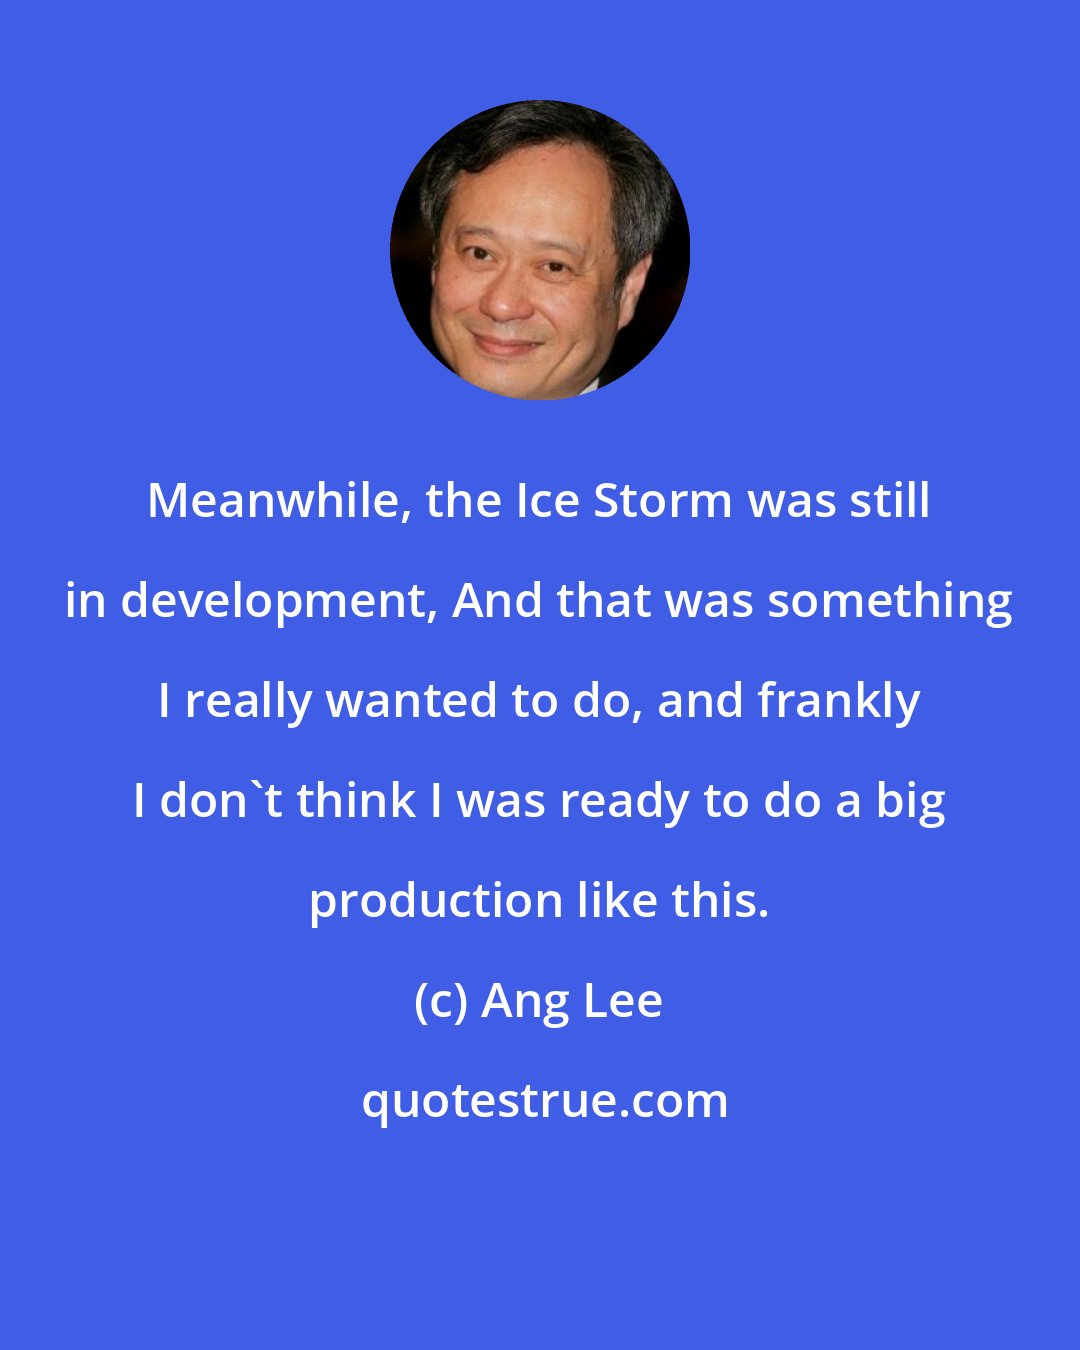 Ang Lee: Meanwhile, the Ice Storm was still in development, And that was something I really wanted to do, and frankly I don't think I was ready to do a big production like this.